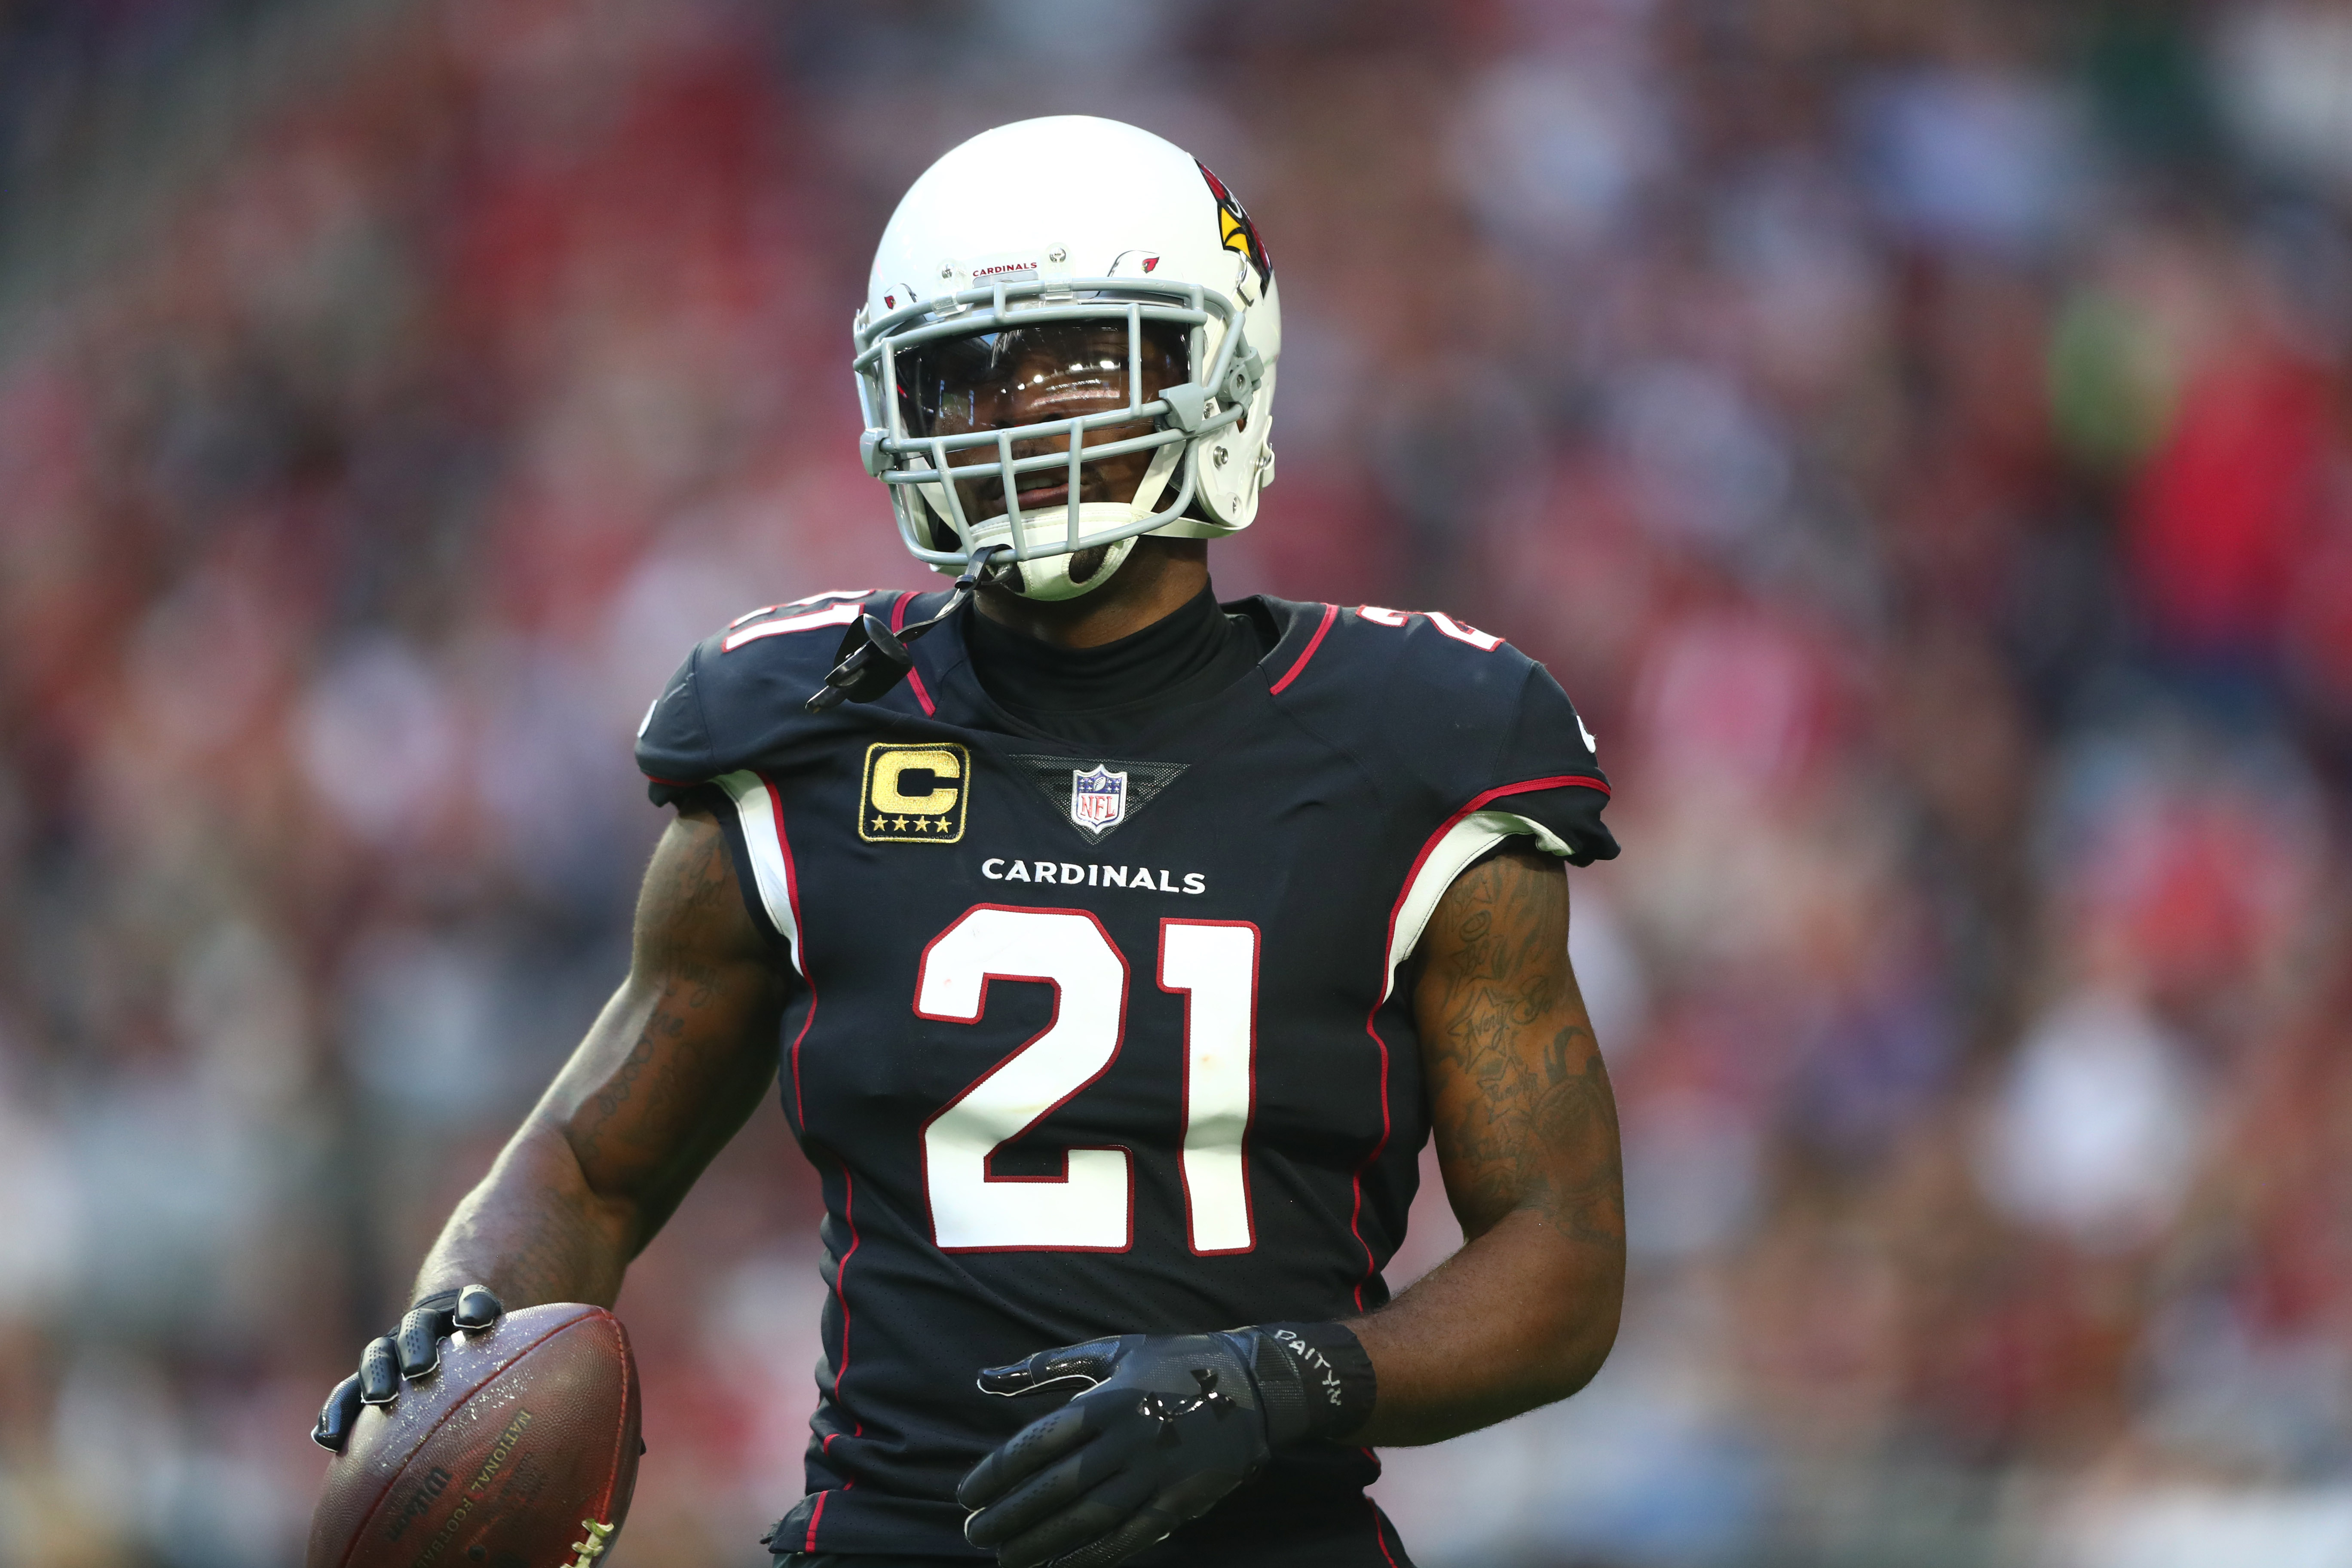 NFL trade rumors indicate Eagles still interested in Patrick Peterson